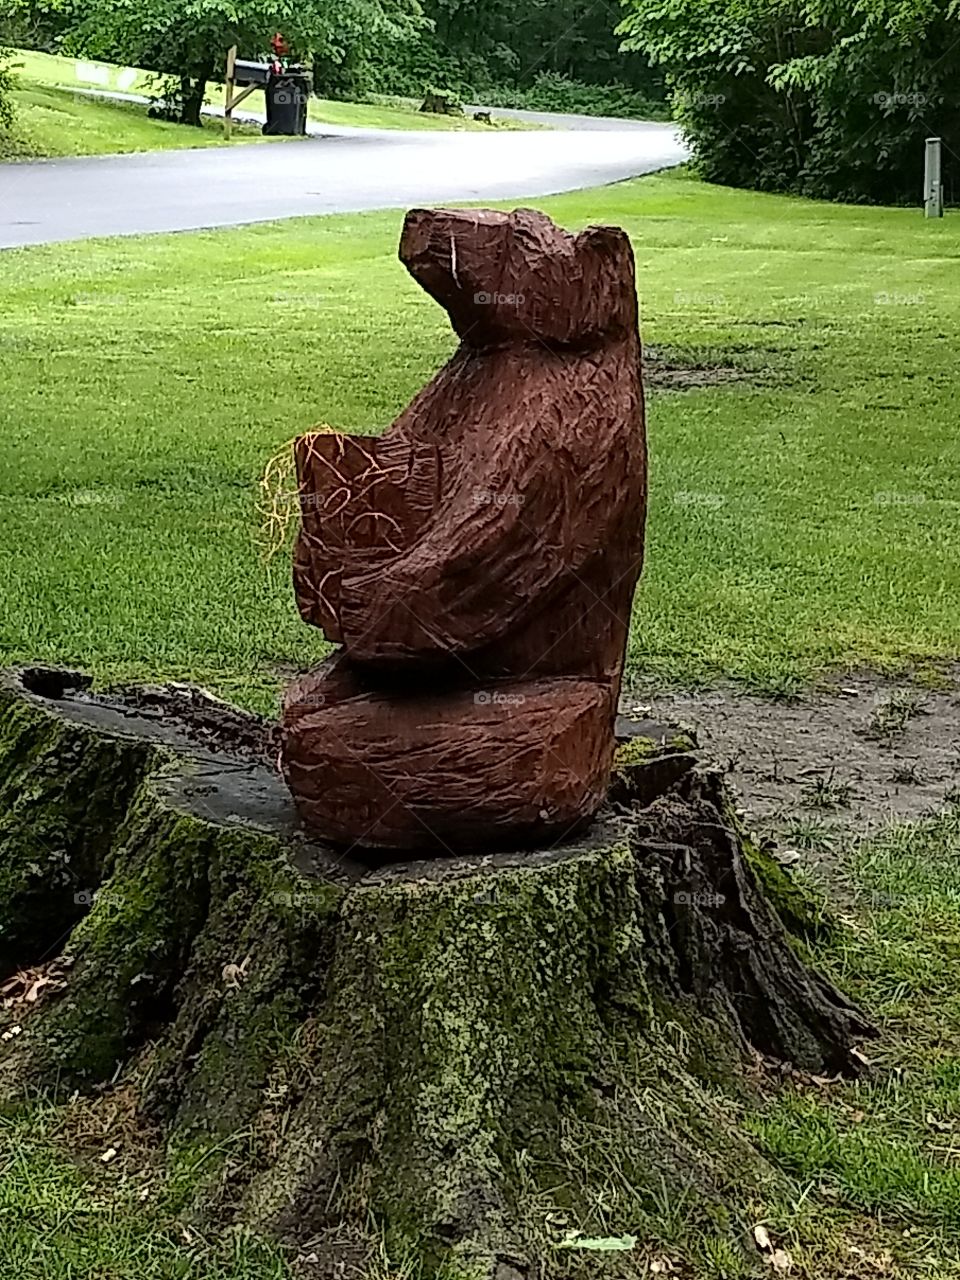 wood carving of a bear.